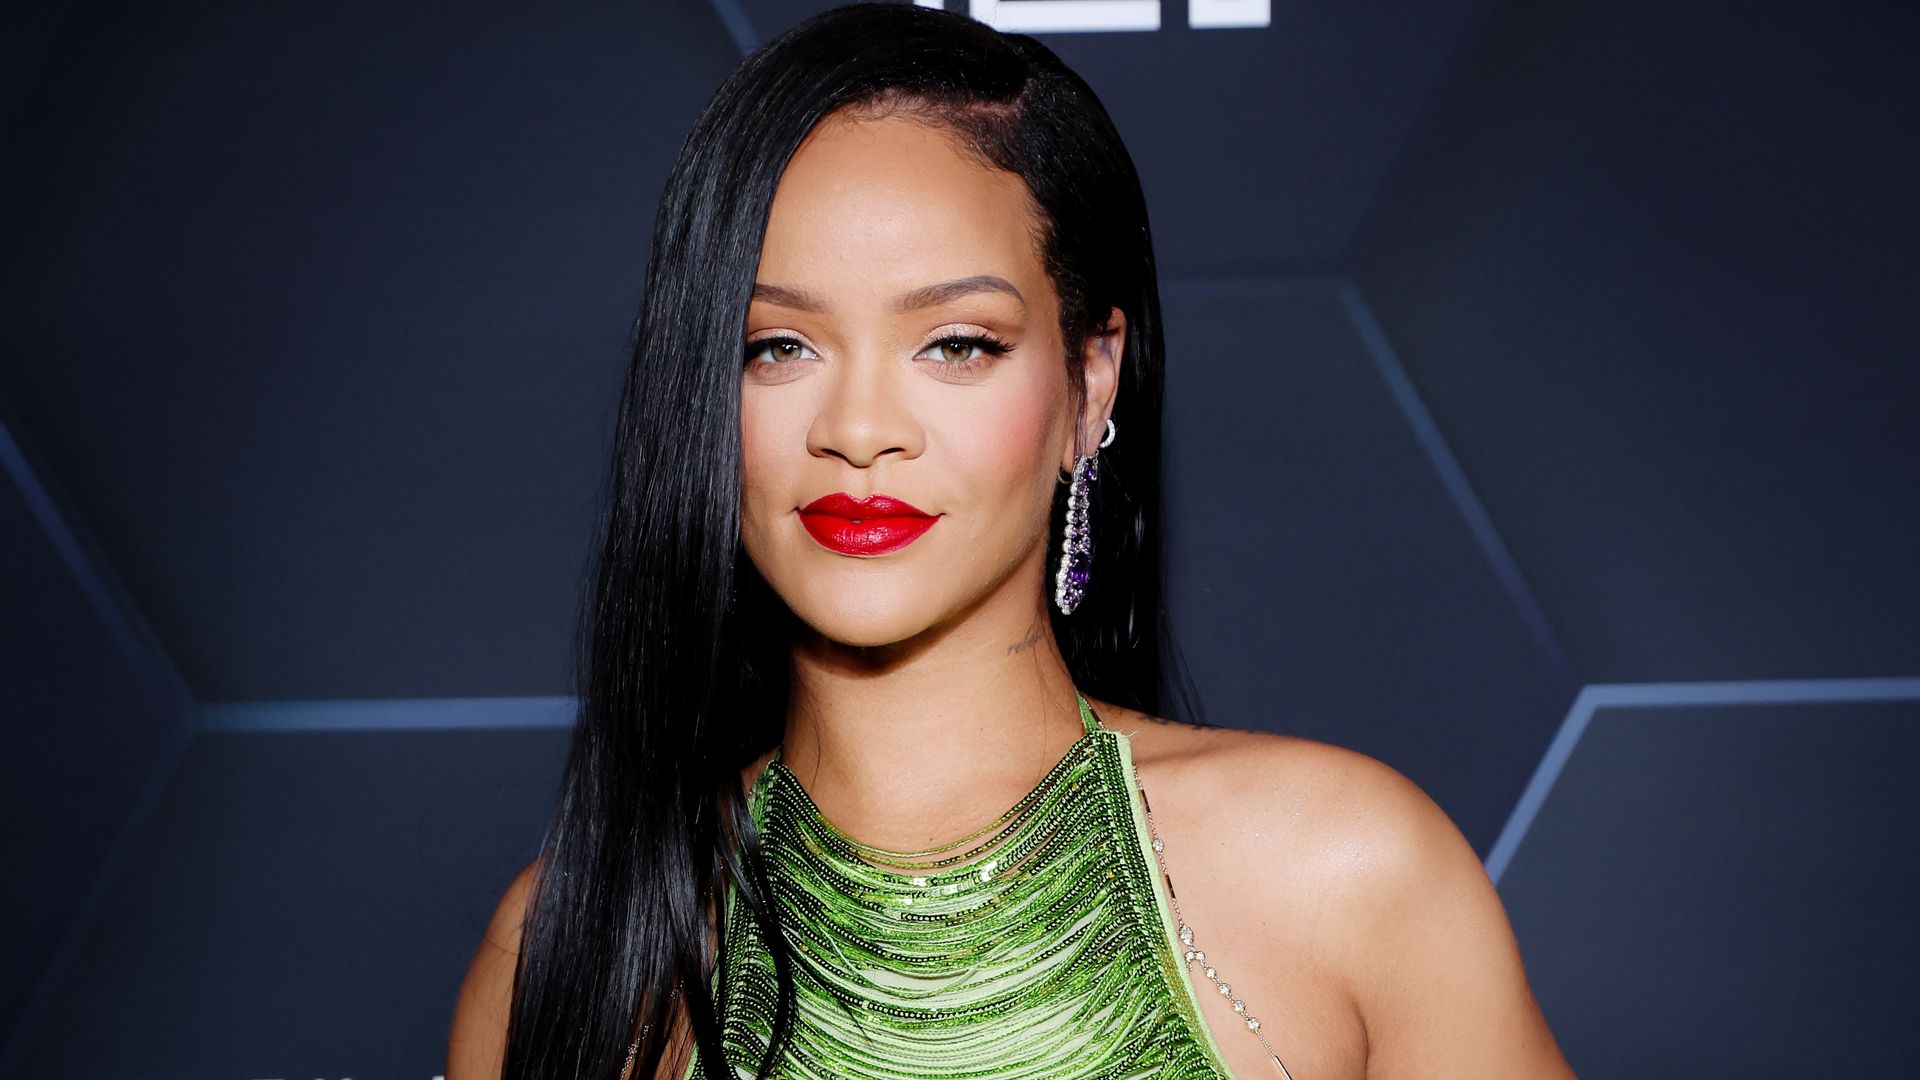 Rihanna looks incredible in lingerie photos after baby number 3 confession